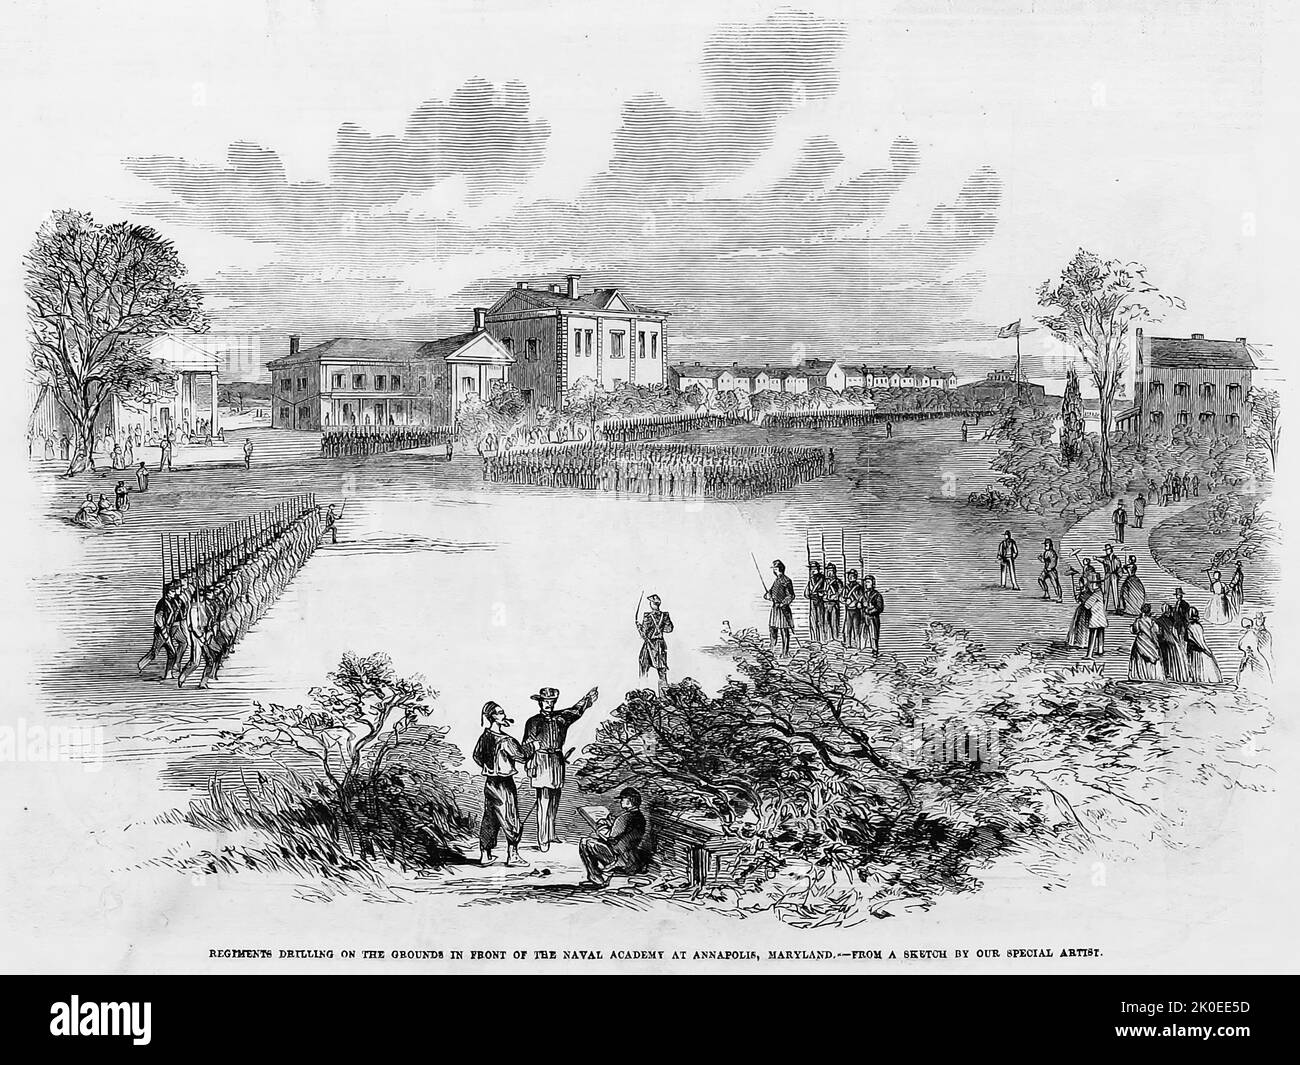 Regiments drilling on the grounds in front of the Naval Academy at Annapolis, Maryland, May 1861. 19th century American Civil War illustration from Frank Leslie's Illustrated Newspaper Stock Photo